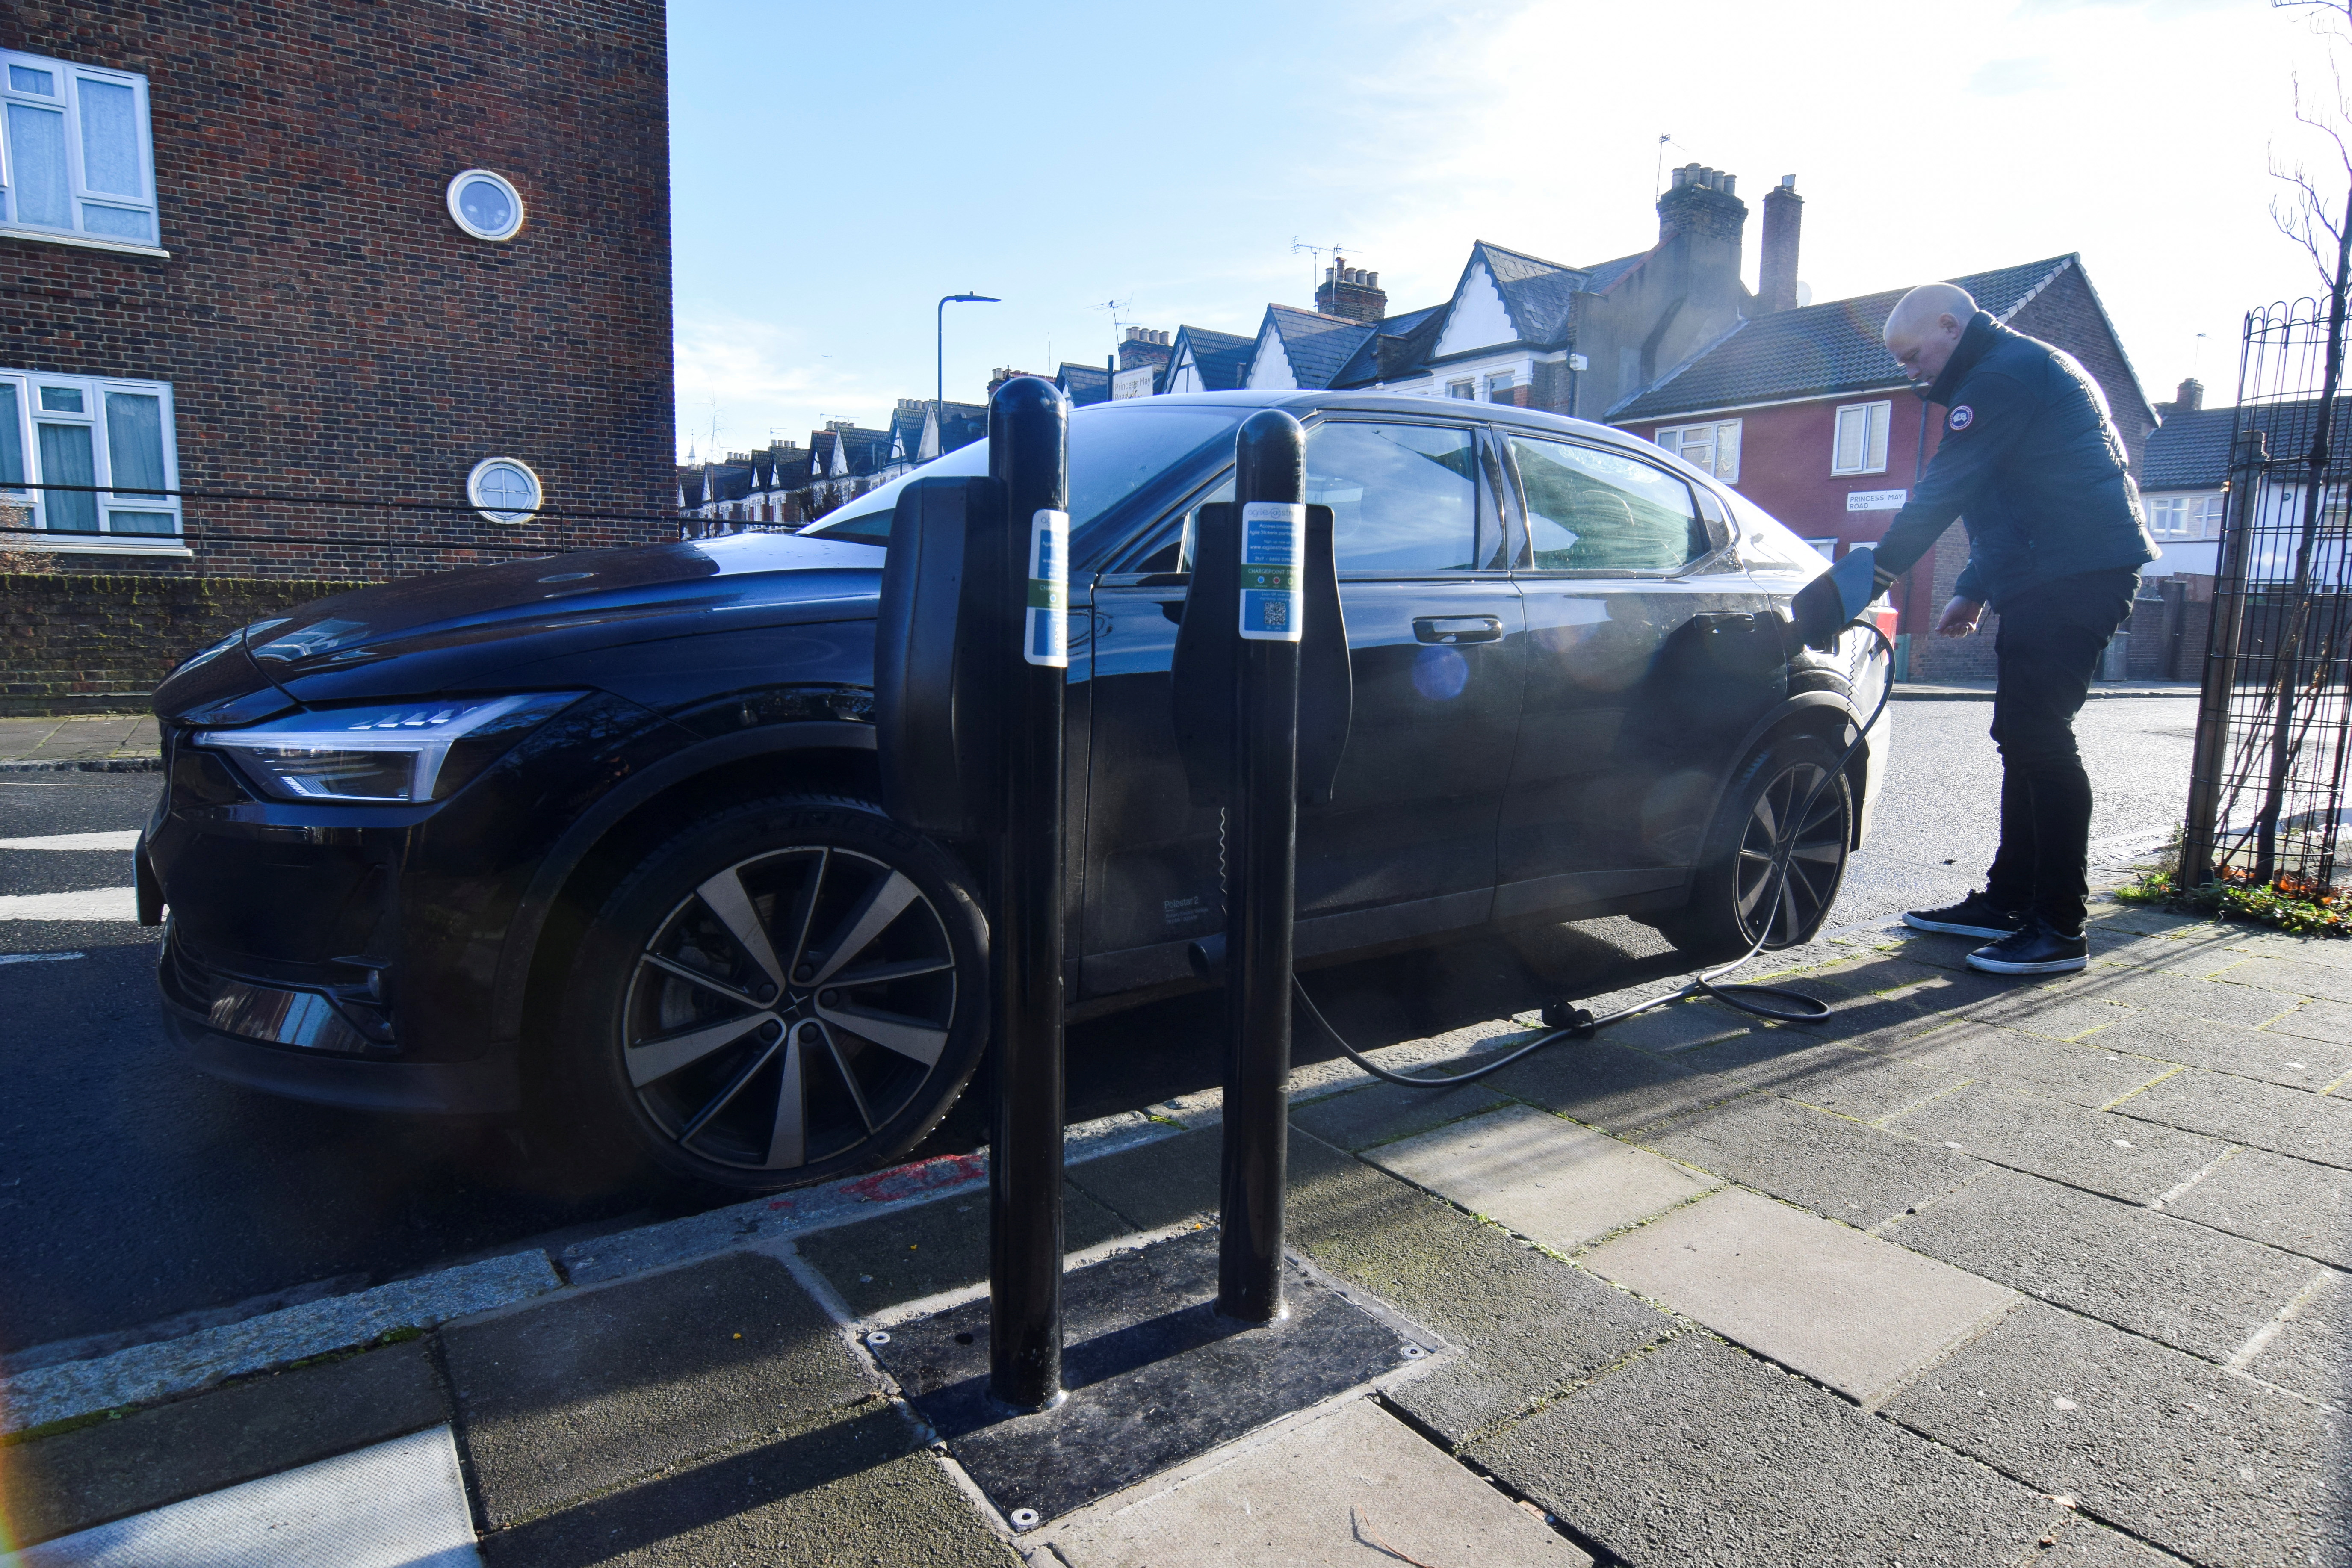 Connected Kerb CEO Chris Pateman-Jones plugs his electric vehicle into one of the charging infrastructure company's smart public on-street chargers in the borough of Hackney, London